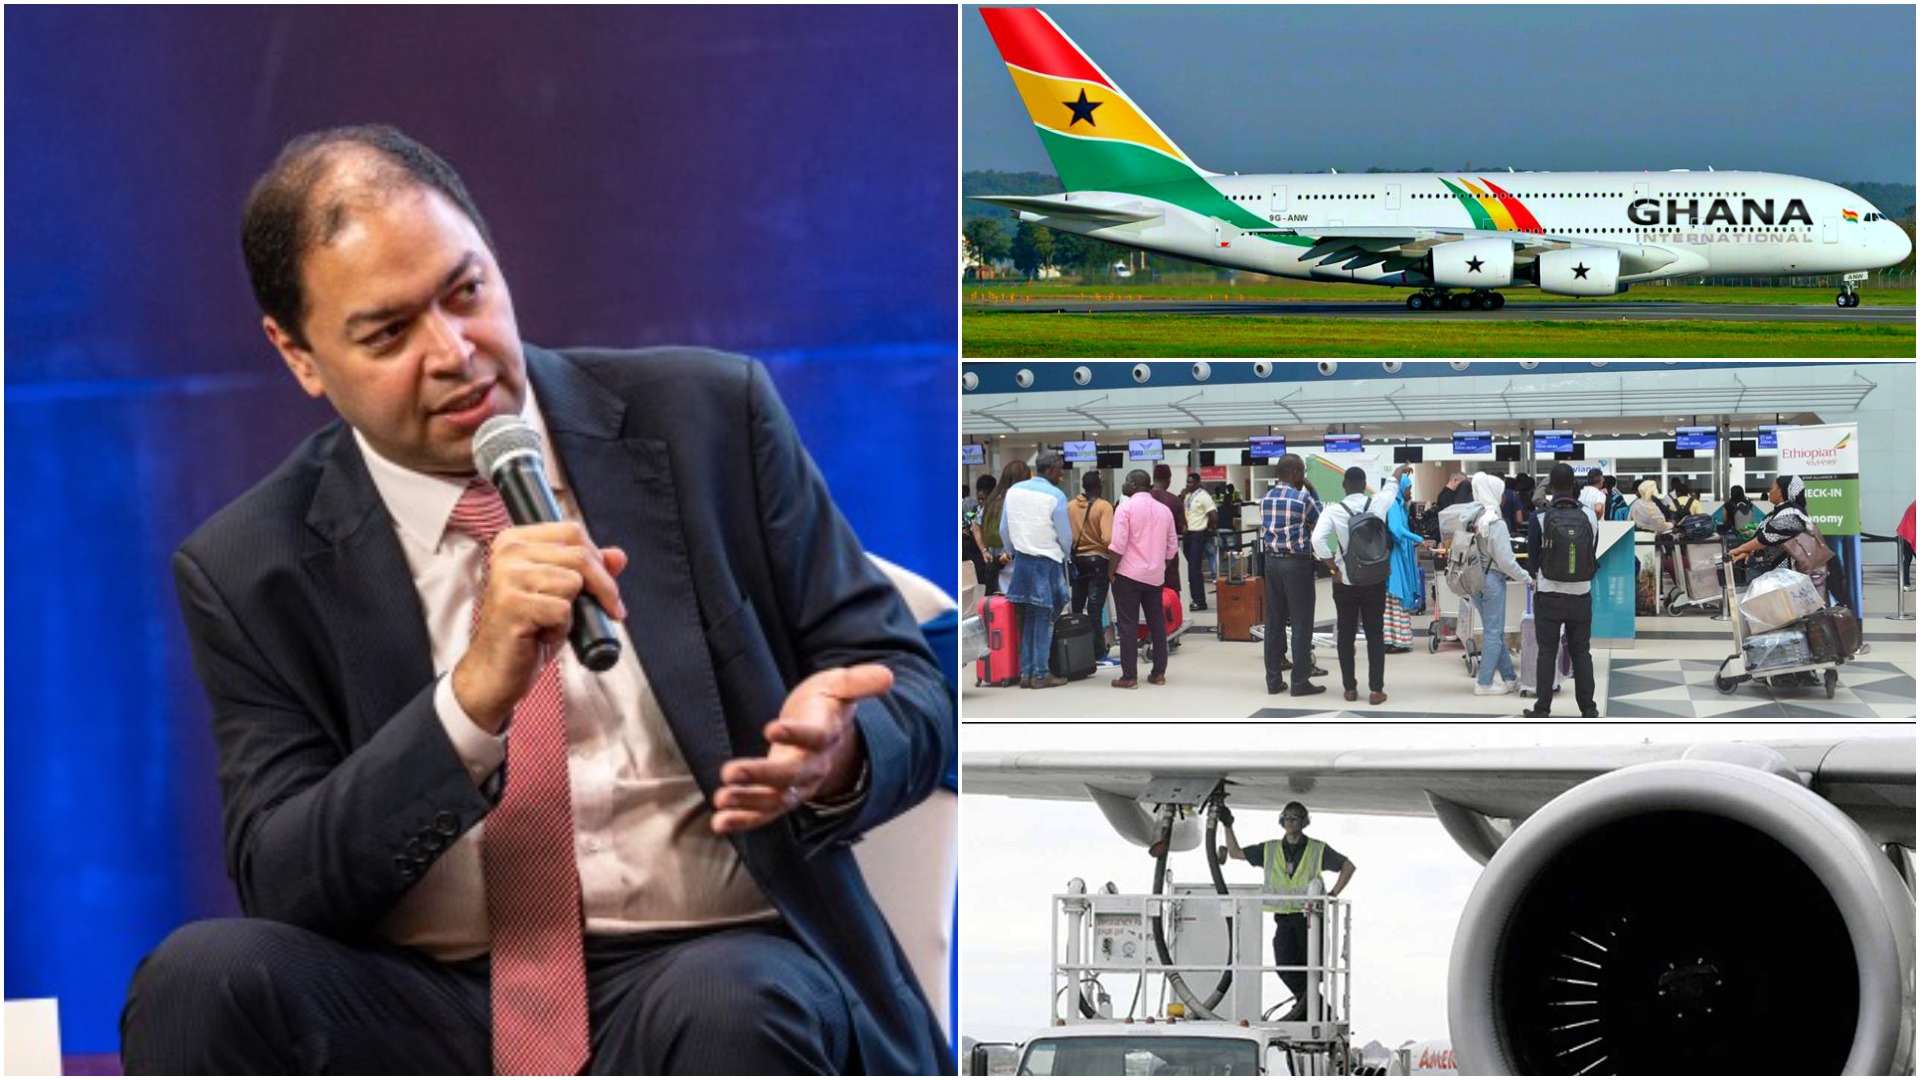 Flying this year will be cheaper - Aviation expert